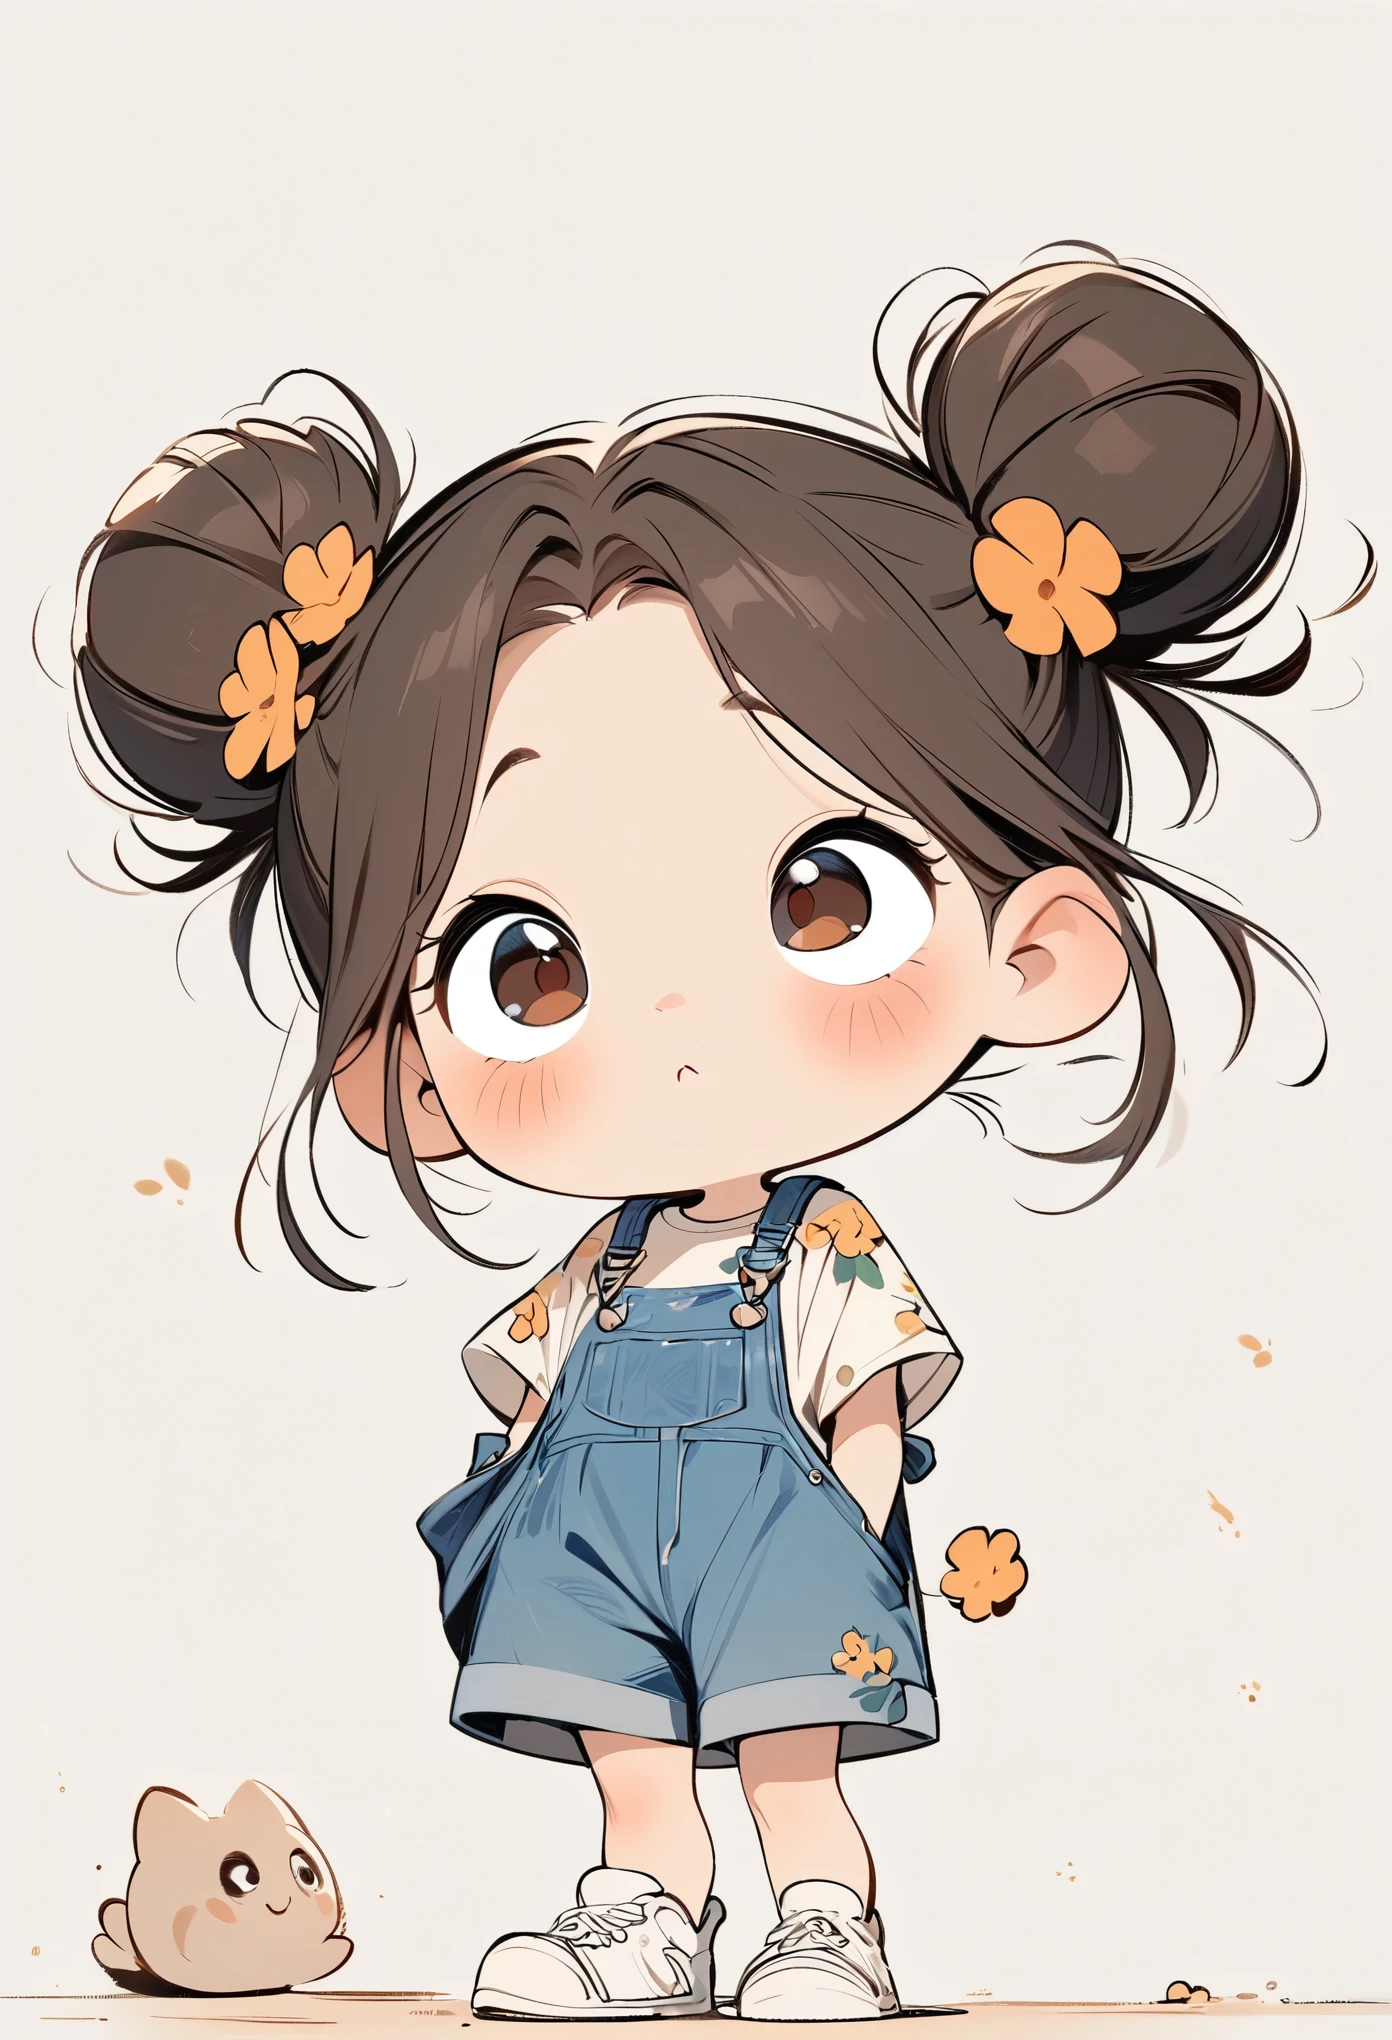 (masterpiece, best quality:1.2), cartoonish character design。1 girl, alone，big eyes，cute expression，Two hair buns，Loose floral shirt，Blue Denim Overalls，White sneakers，stand，interesting，interesting，clean lines